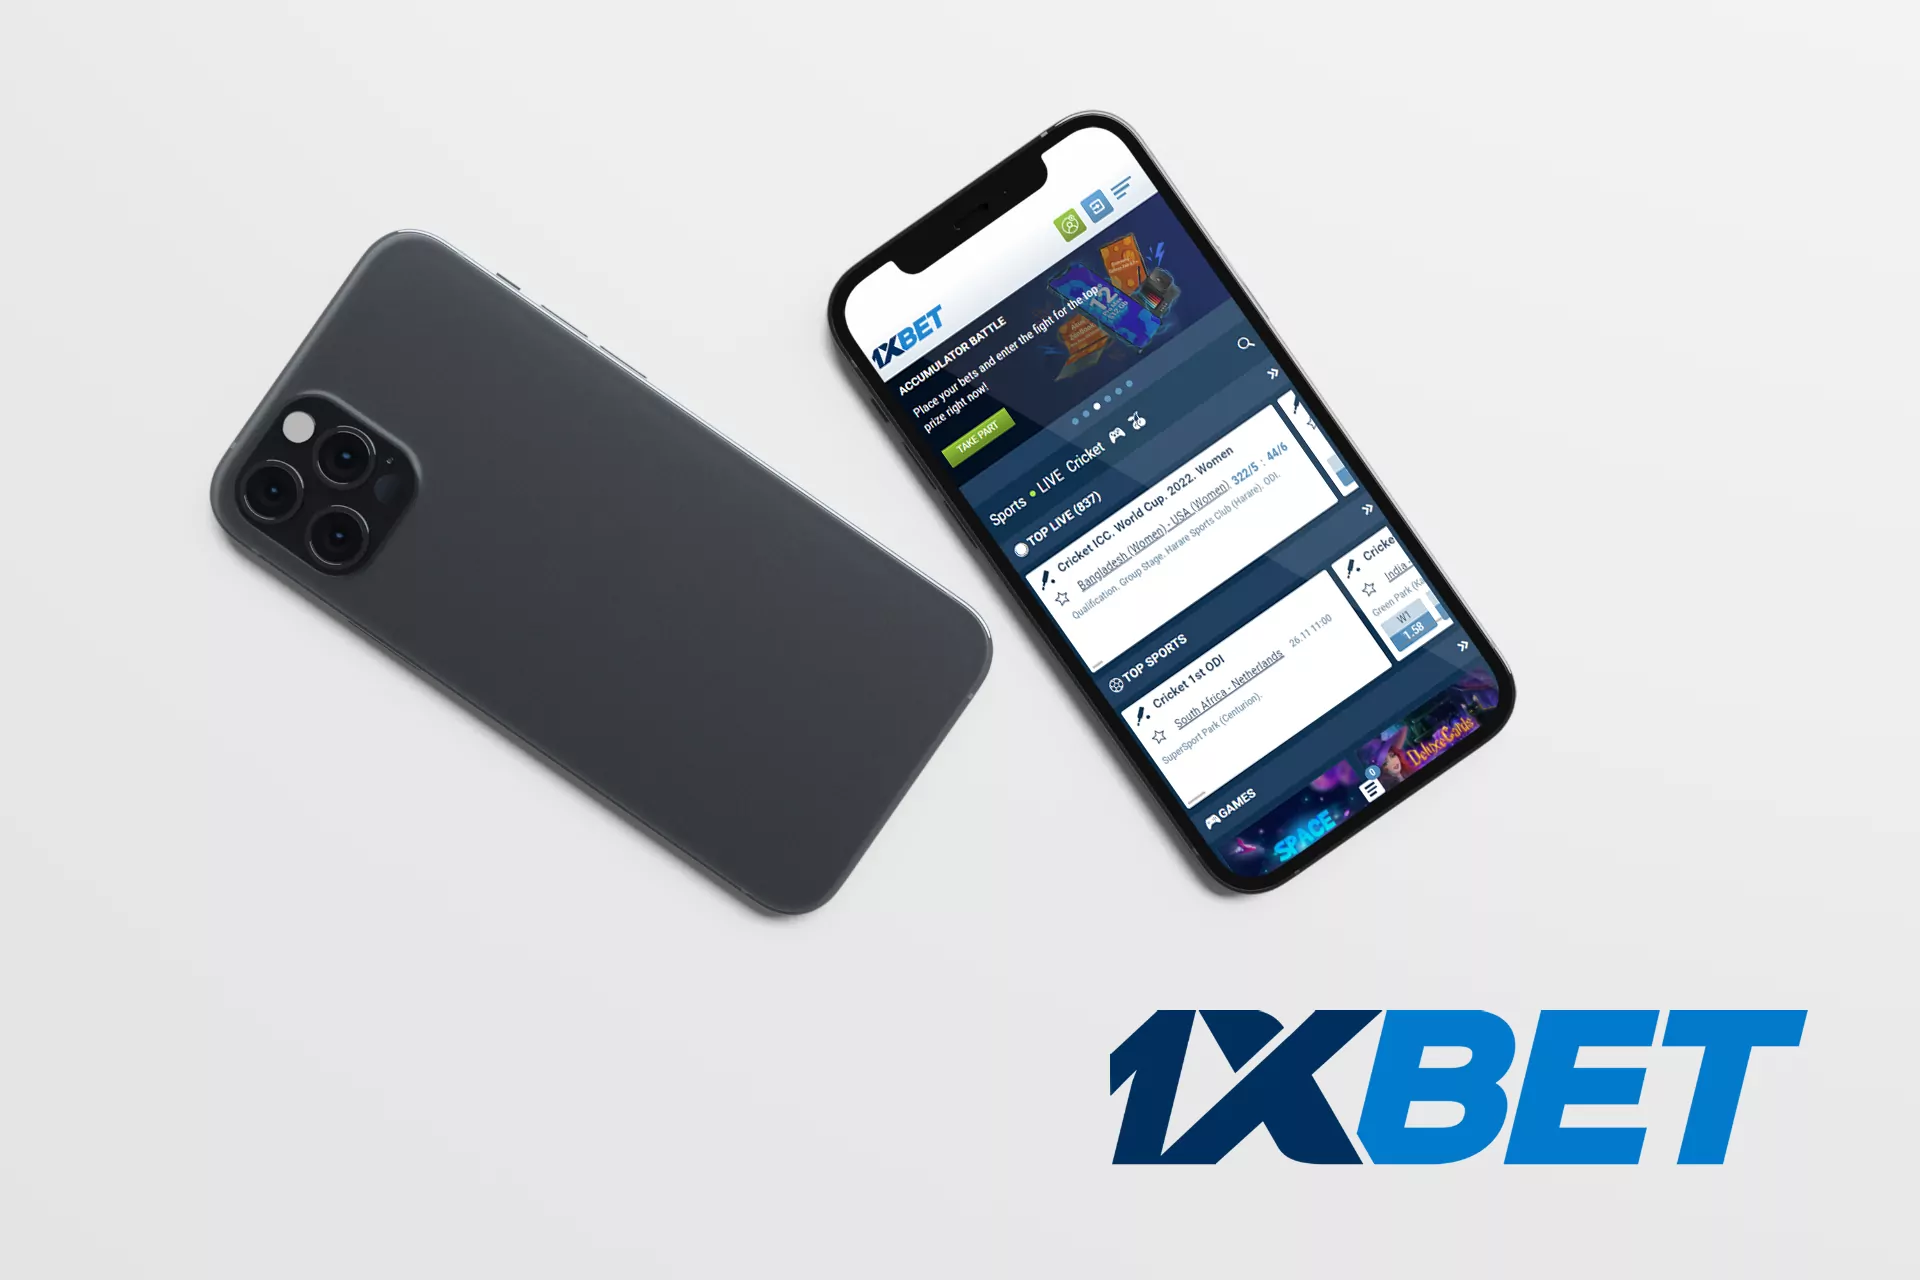 In the 1xbet app, you find a wide selection of sports and esports matches.